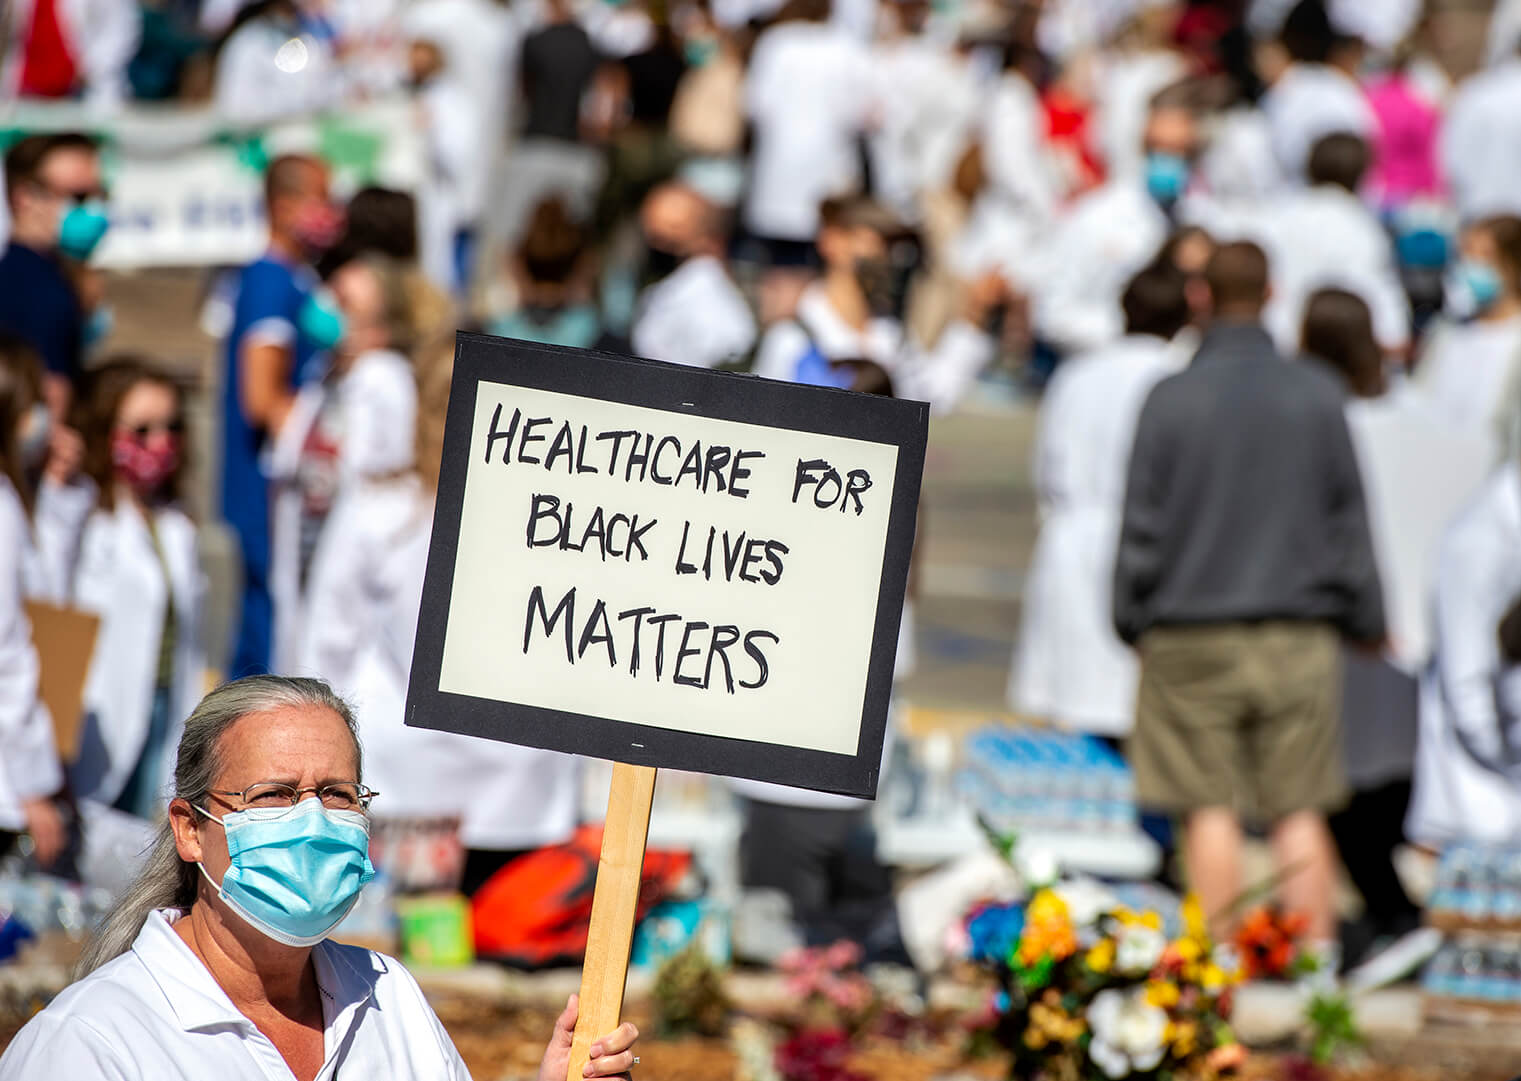 Woman in white coat holding up sign reading "Healthcare for Black Lives Matters"